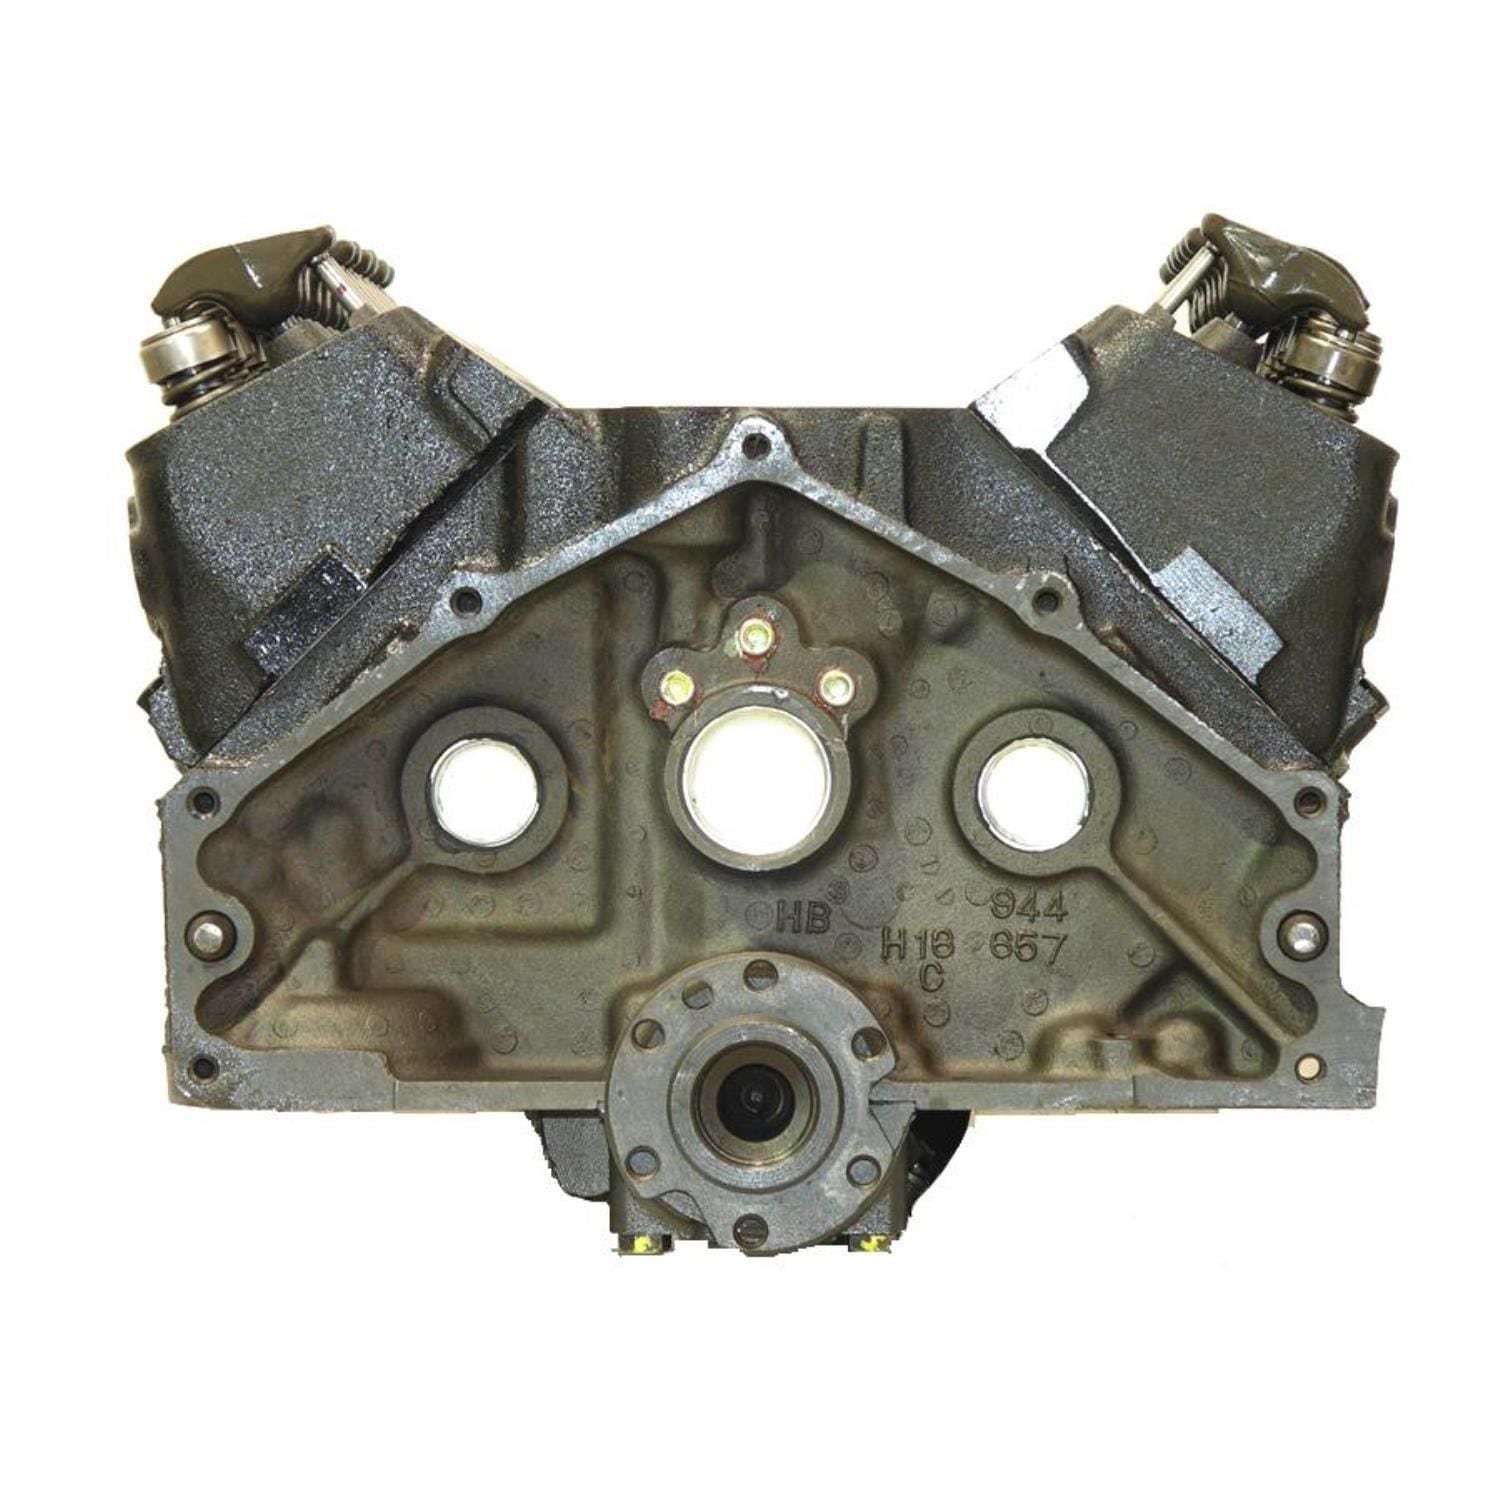 Nutech Remanufactured Long Block Engine Dc46